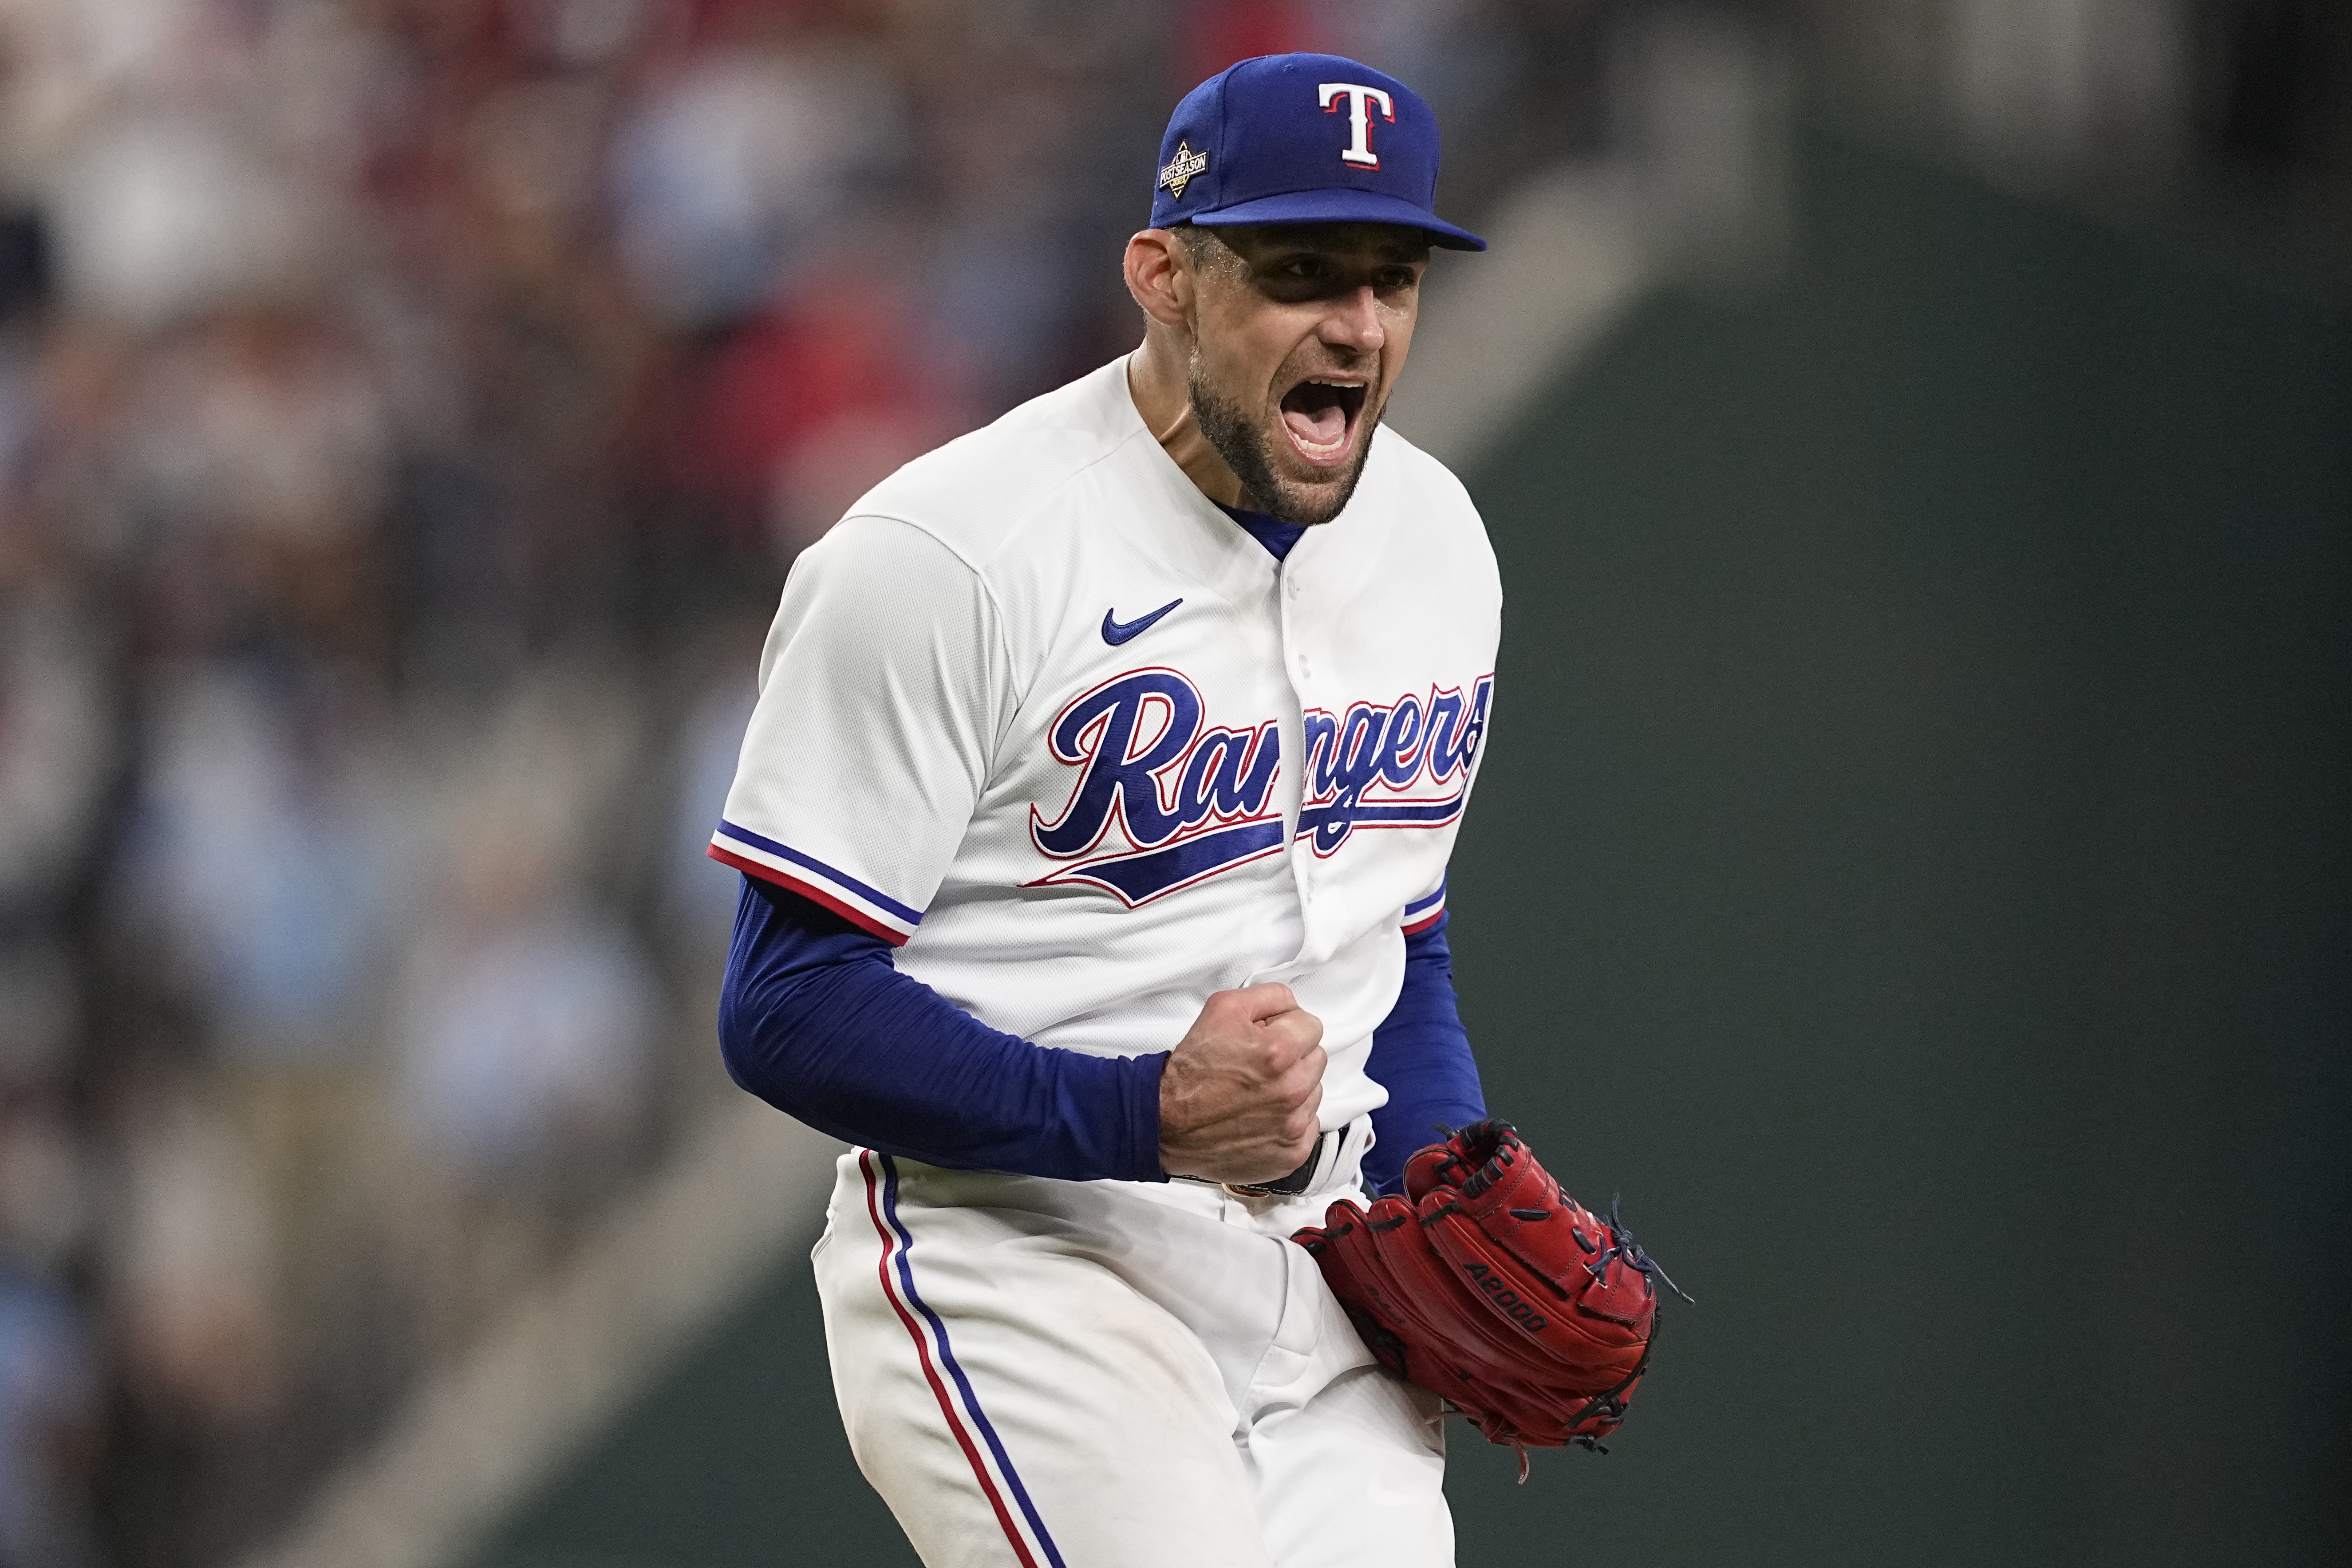 Rangers vs. Astros live stream: What channel is game on, how to